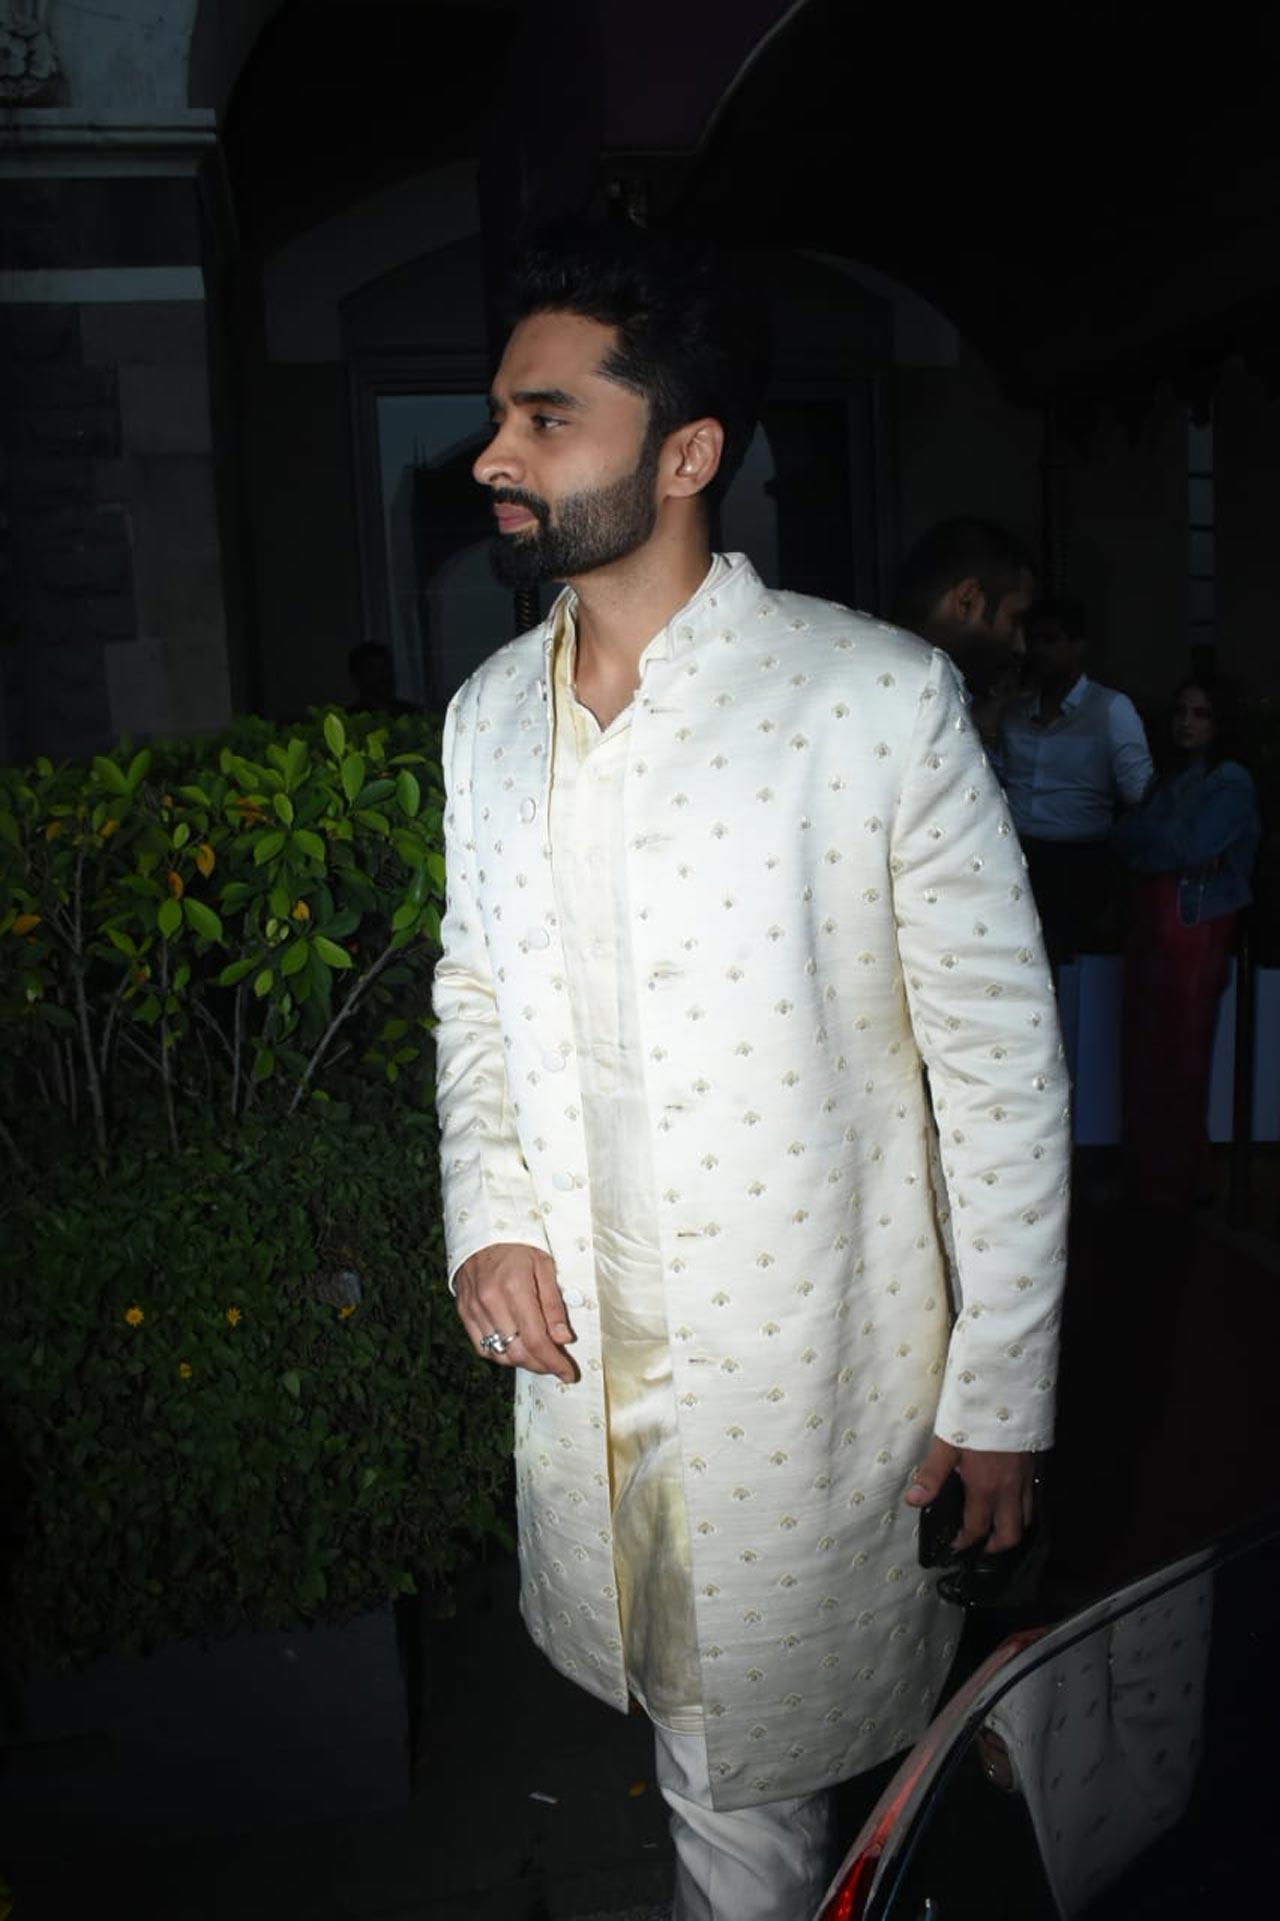 Jackky Bhagnani was also seen in an ivory white sherwani, paired with a jacket for the celebration